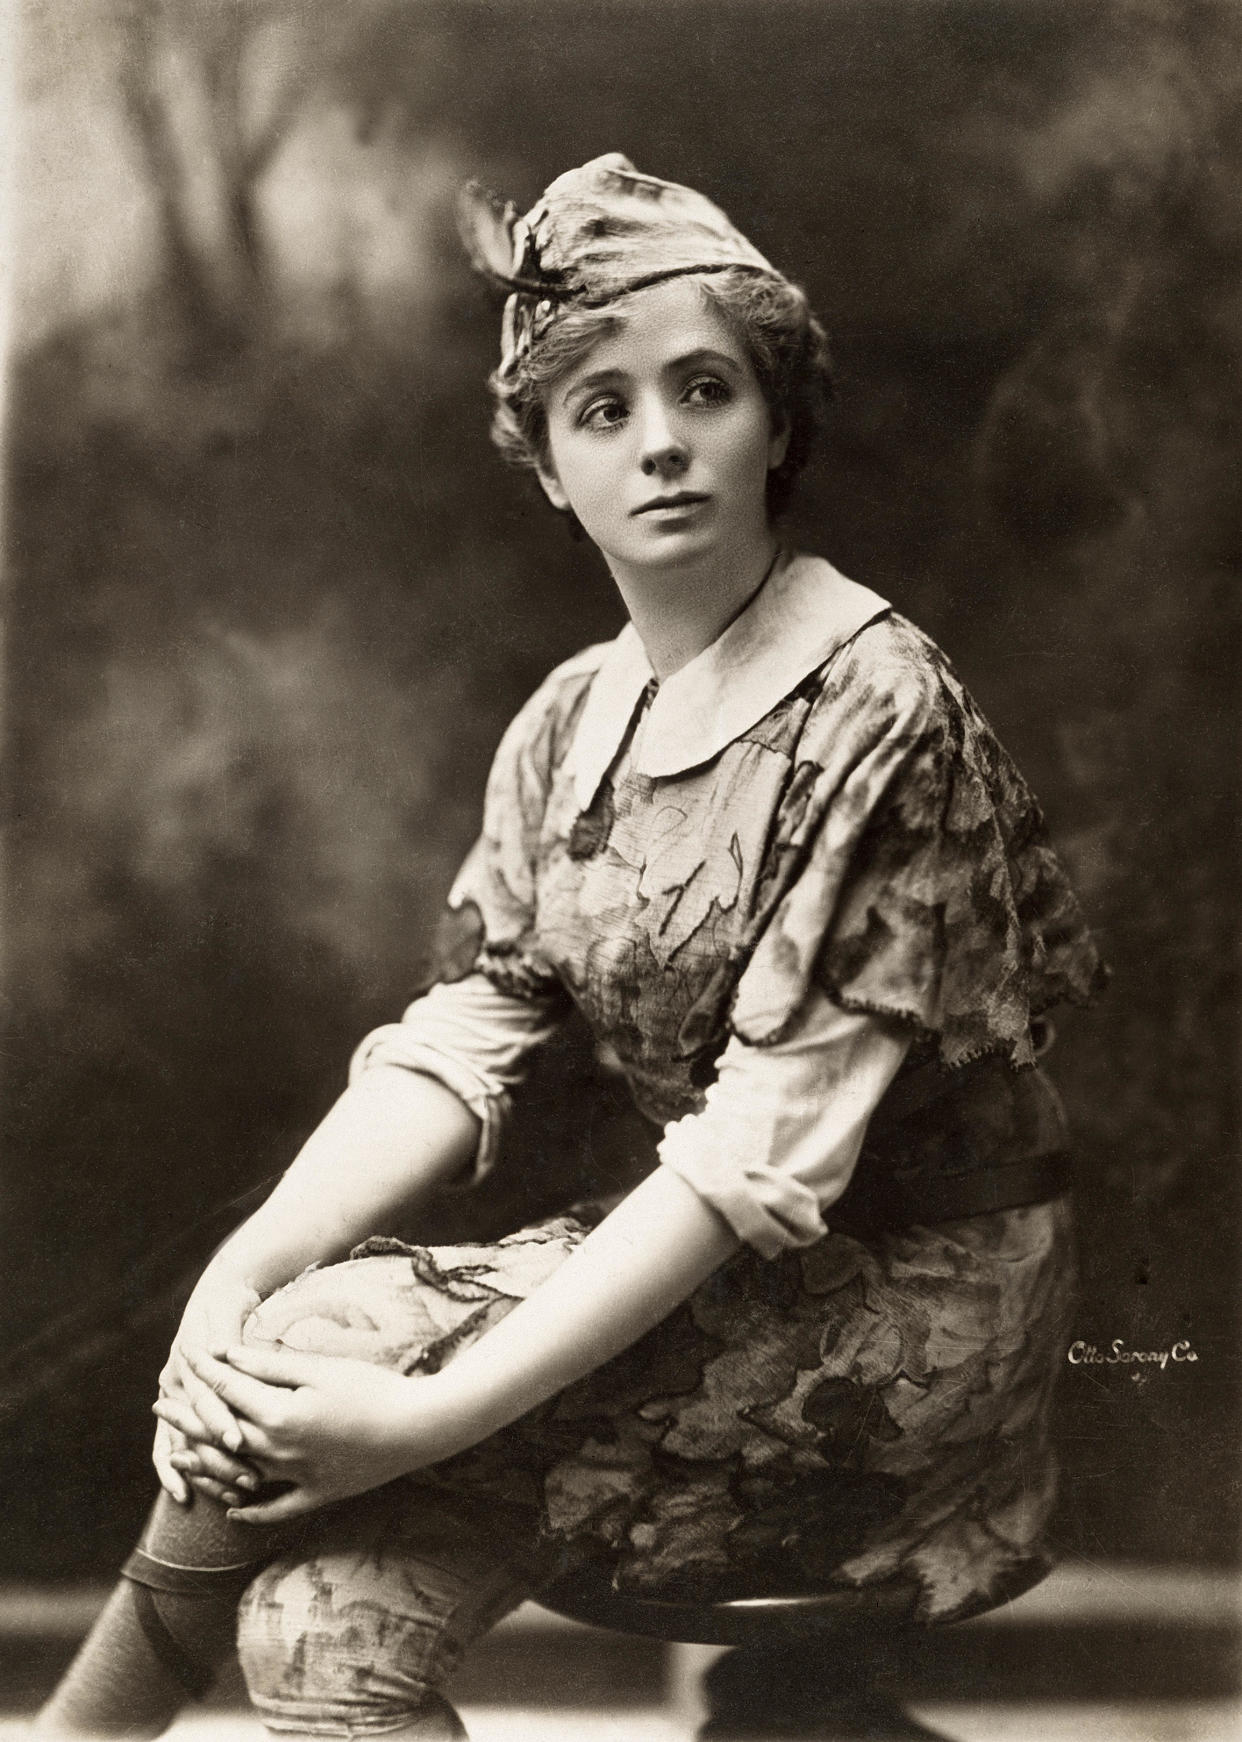 MAUDE ADAMS (1872-1953). /nAmerican actress. Photographed in the role of Peter Pan, 1906.